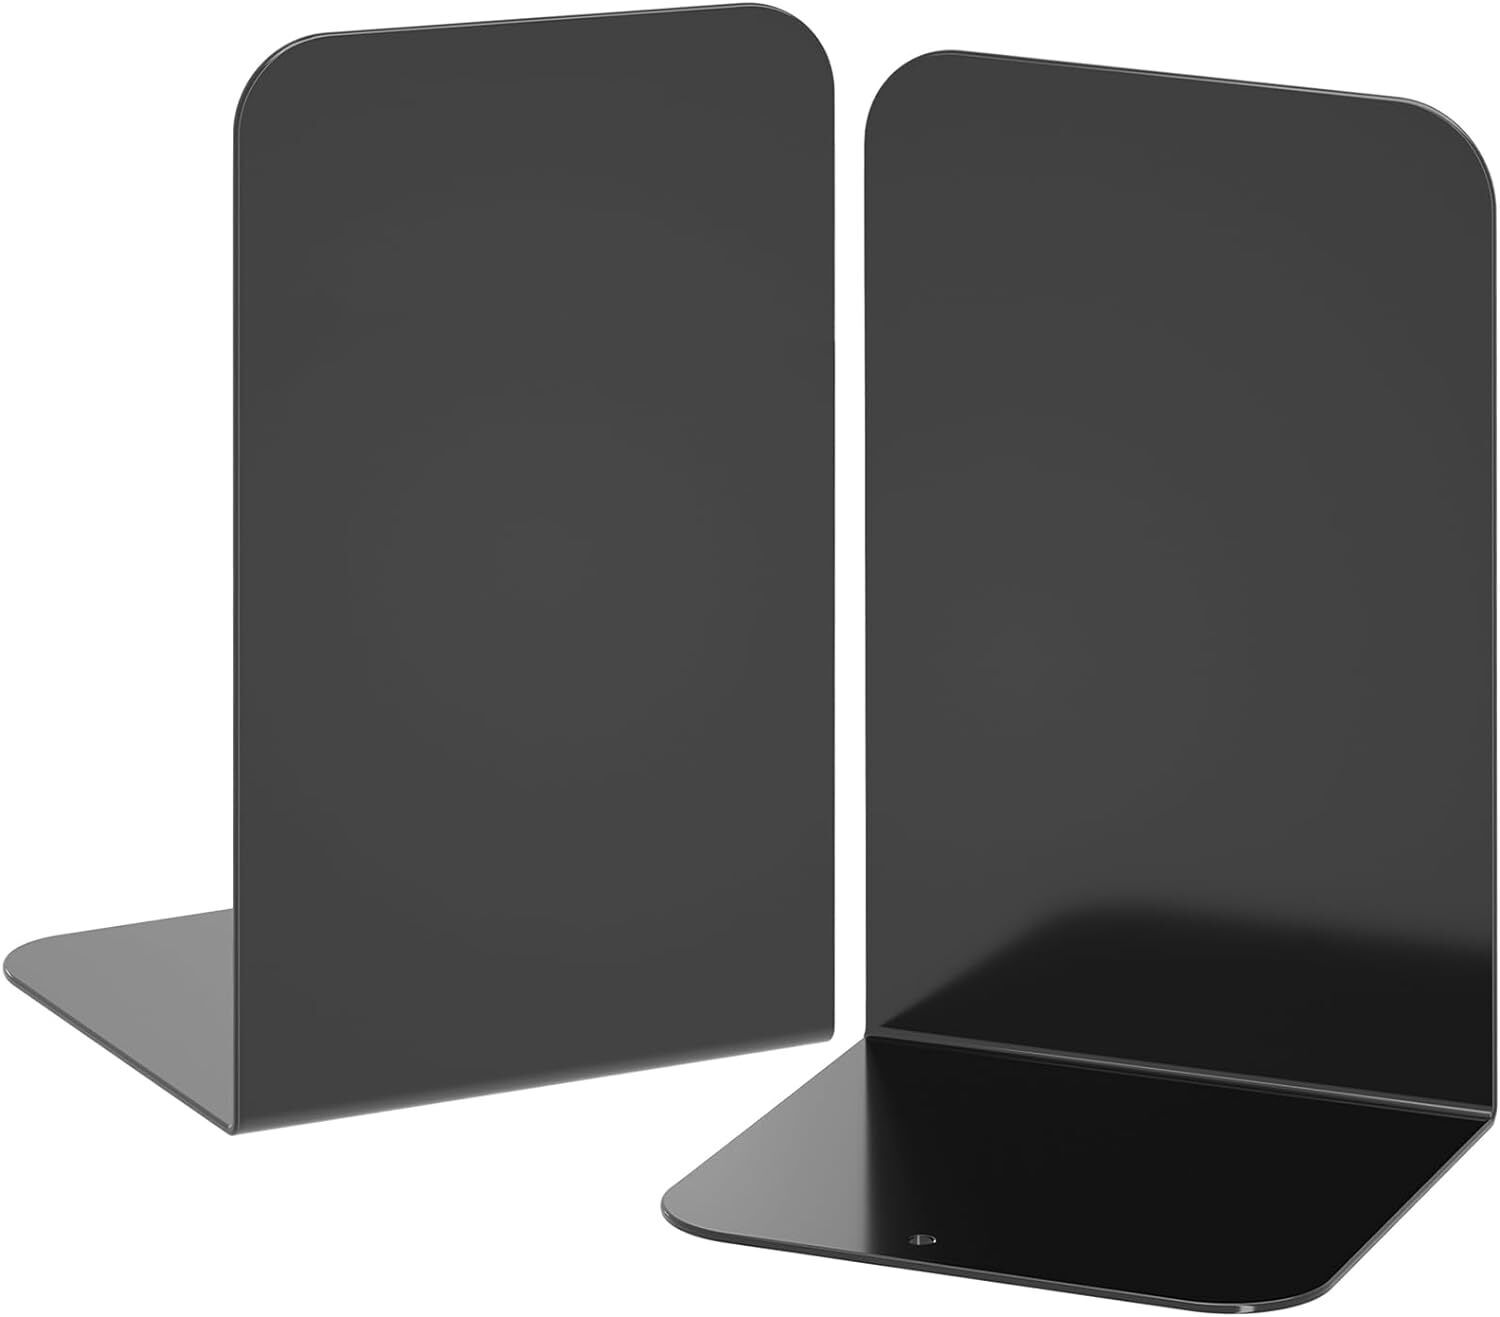 VFINE Bookends, Metal Black Book Ends for Shelves, Bookends for Shelves, Heavy